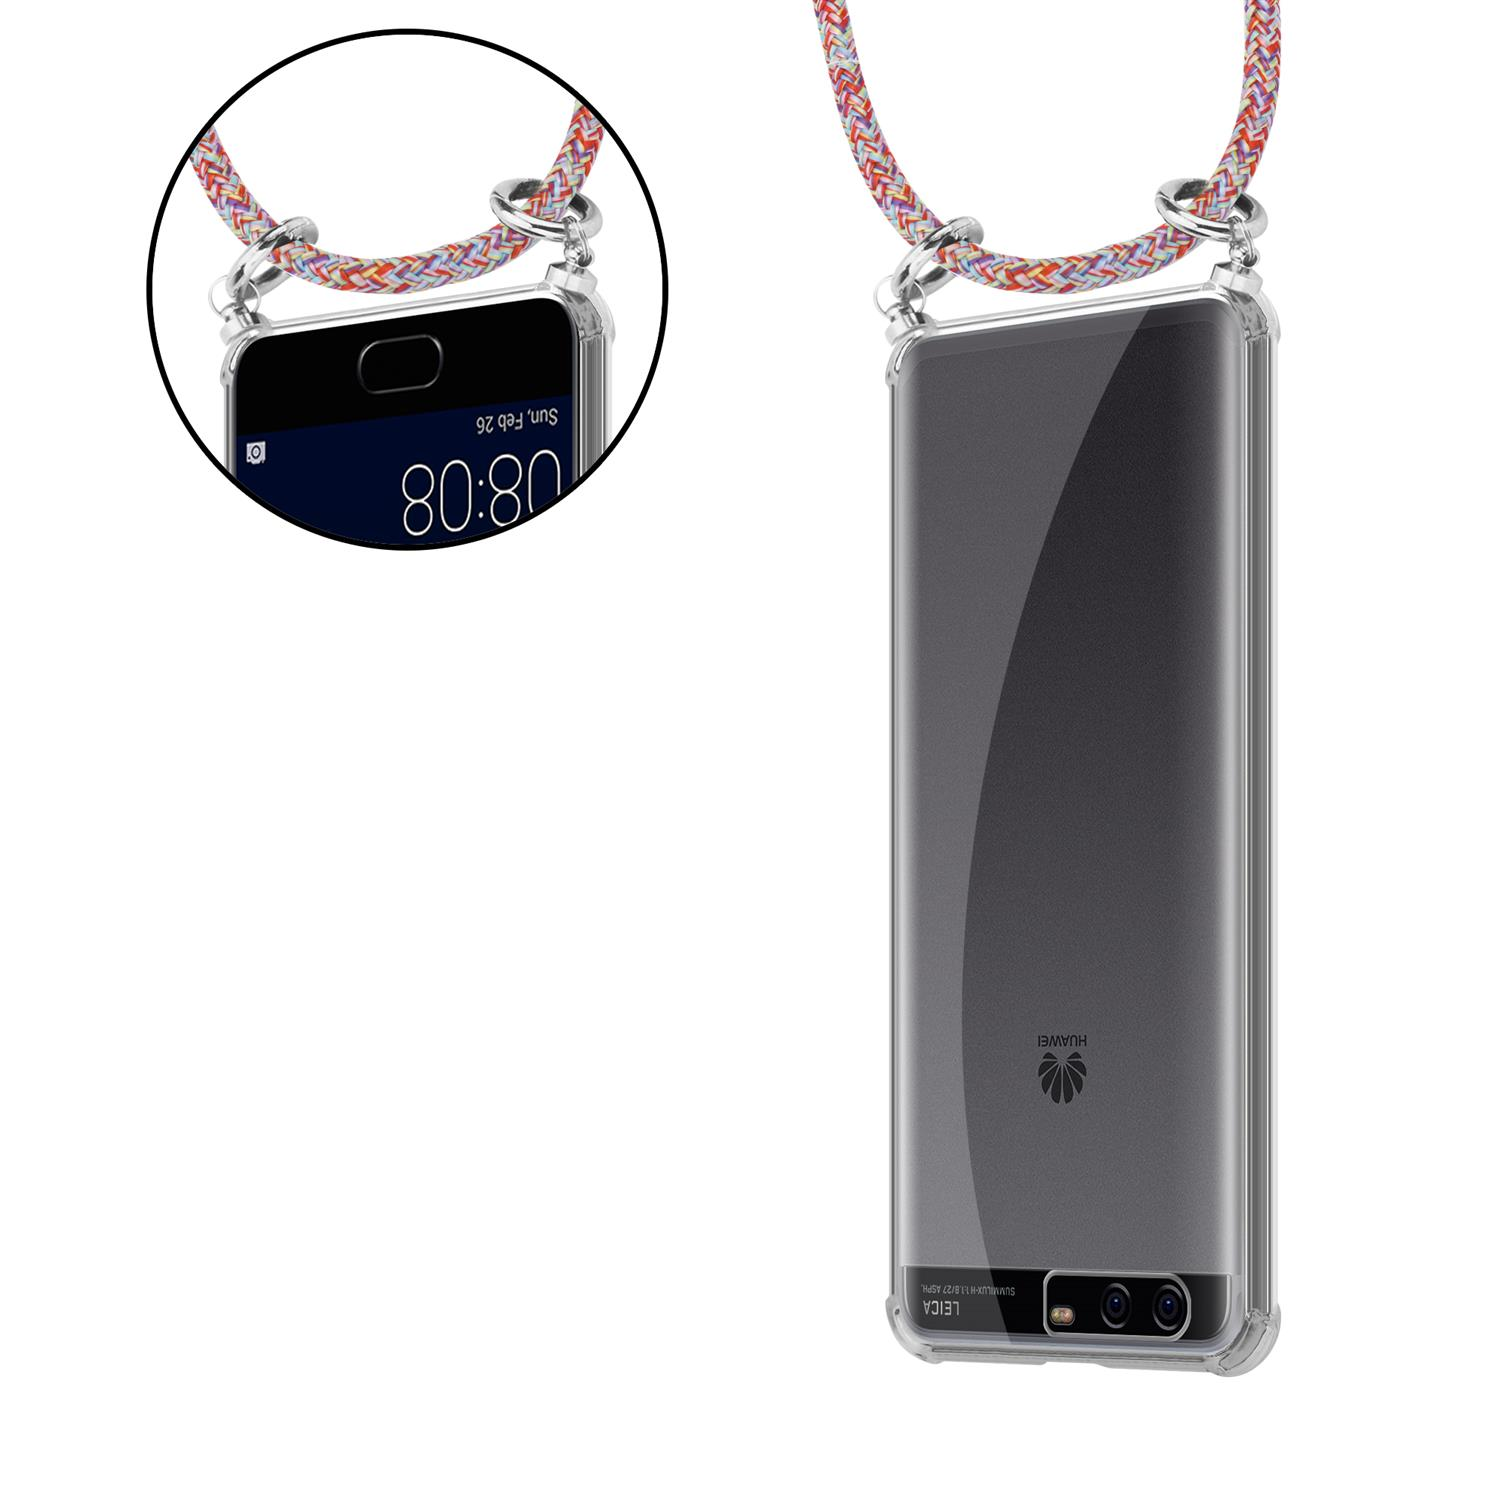 Huawei, Silber und Kordel abnehmbarer Hülle, Ringen, CADORABO Handy PLUS, P10 PARROT Band mit Kette COLORFUL Backcover,